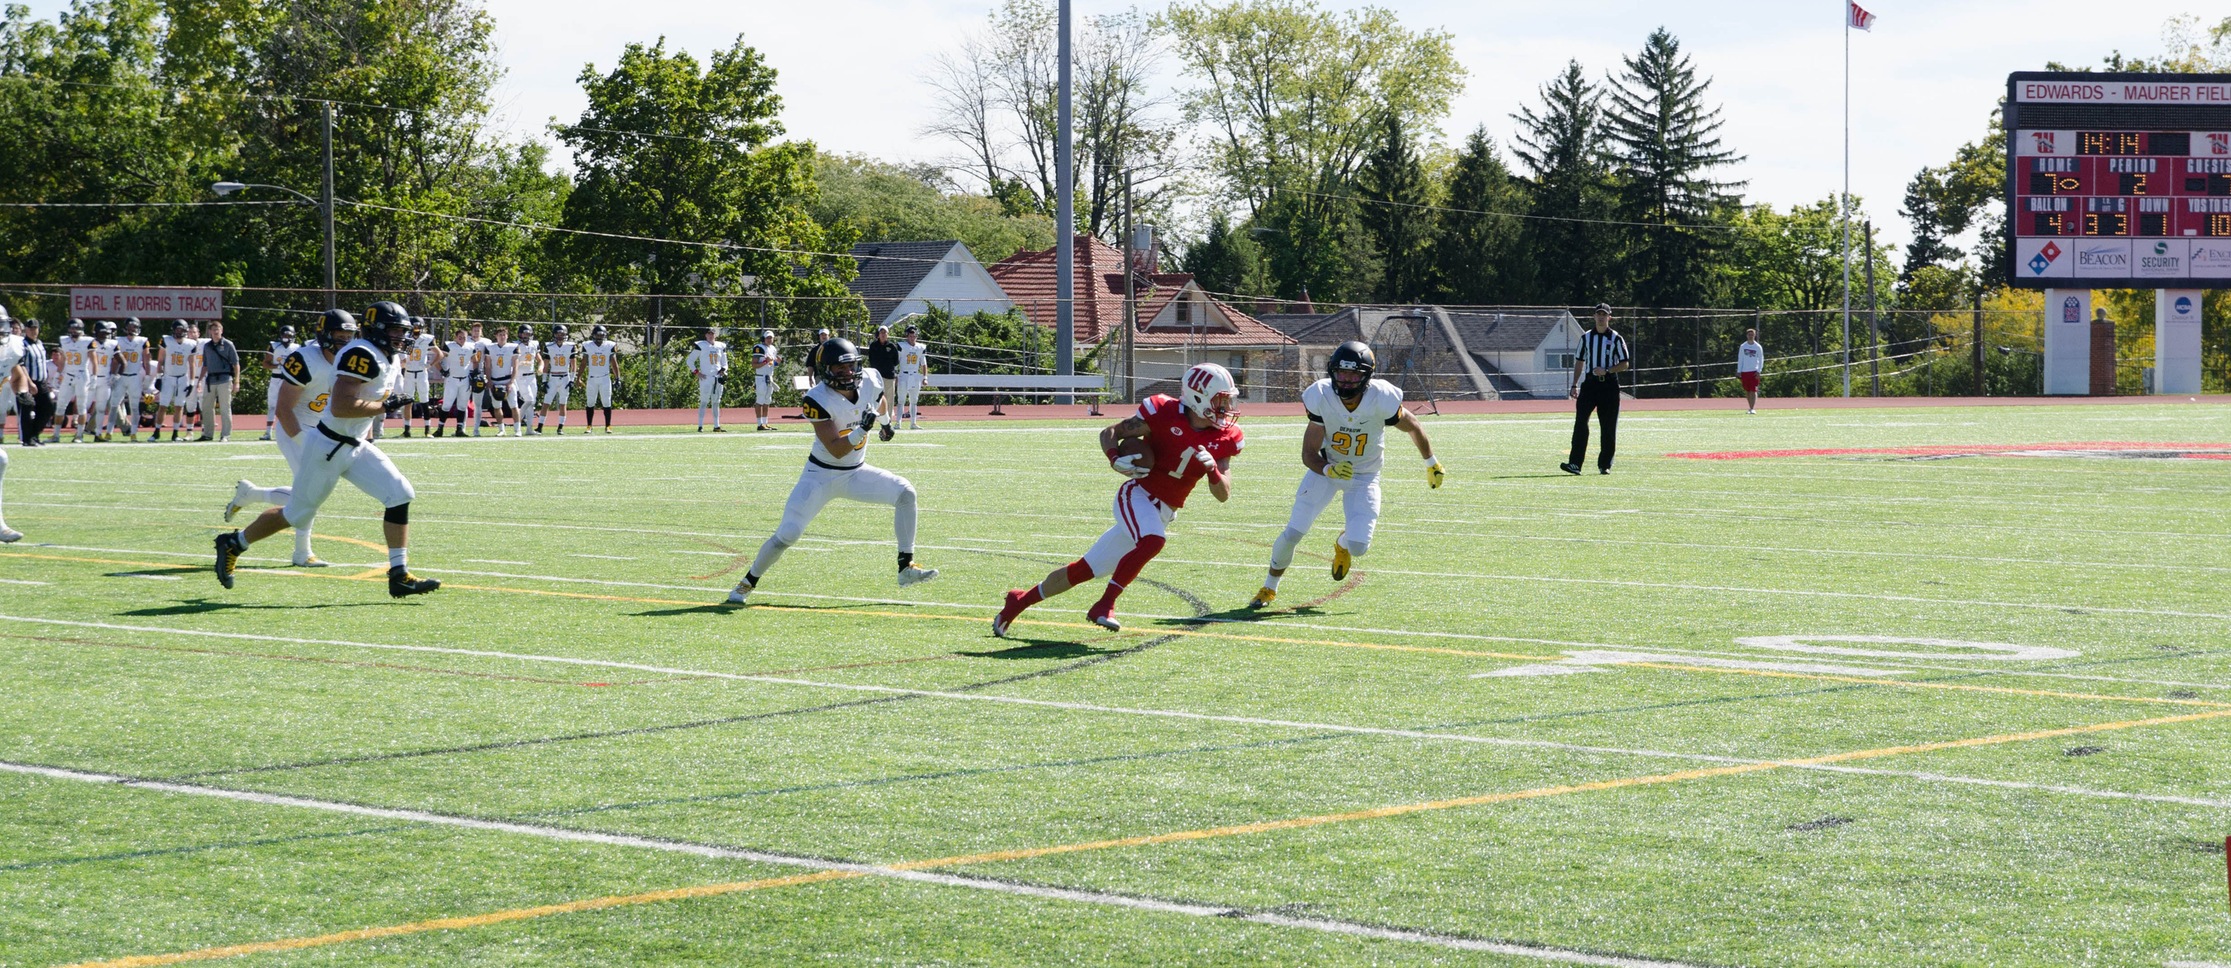 #16 Wittenberg Opens Season with 20-14 Win Over Westminster